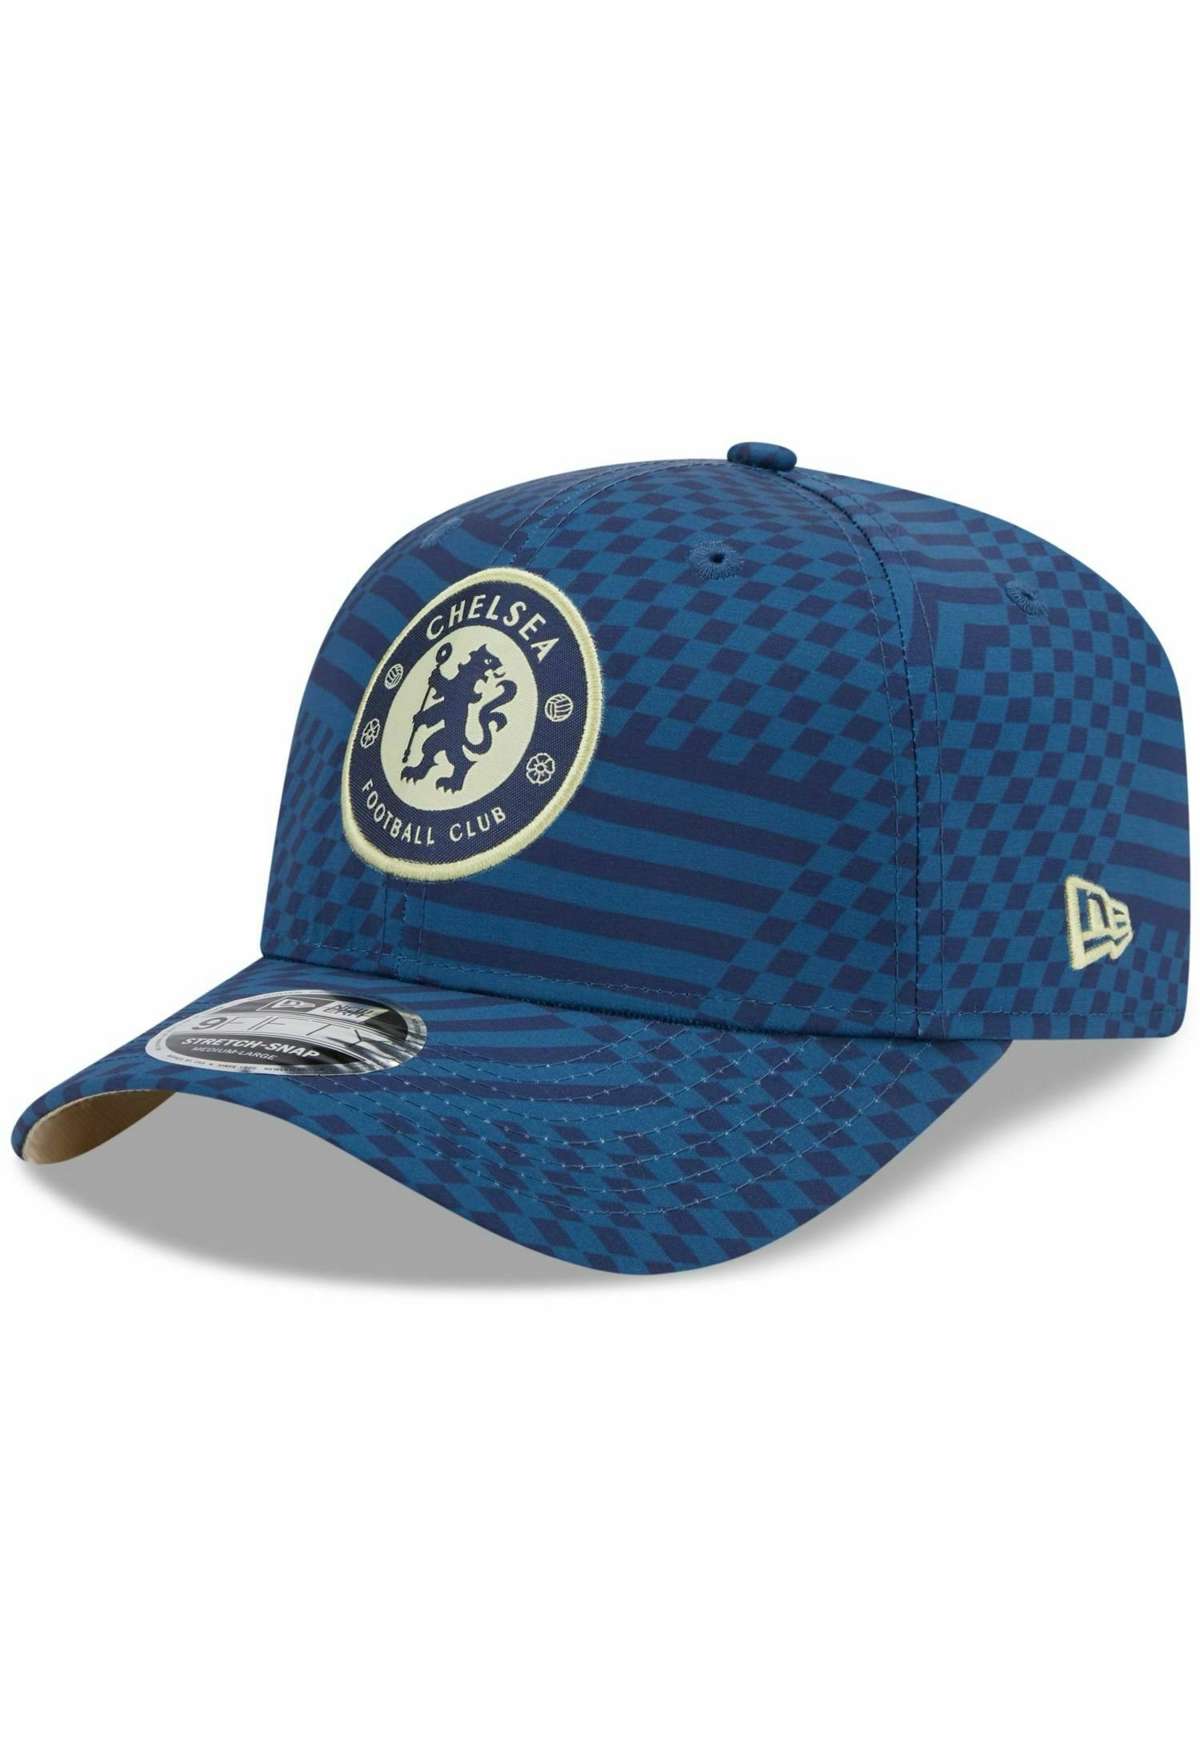 Кепка 9FIFTY STRETCHSNAP AOP CHECK FC CHELSEA